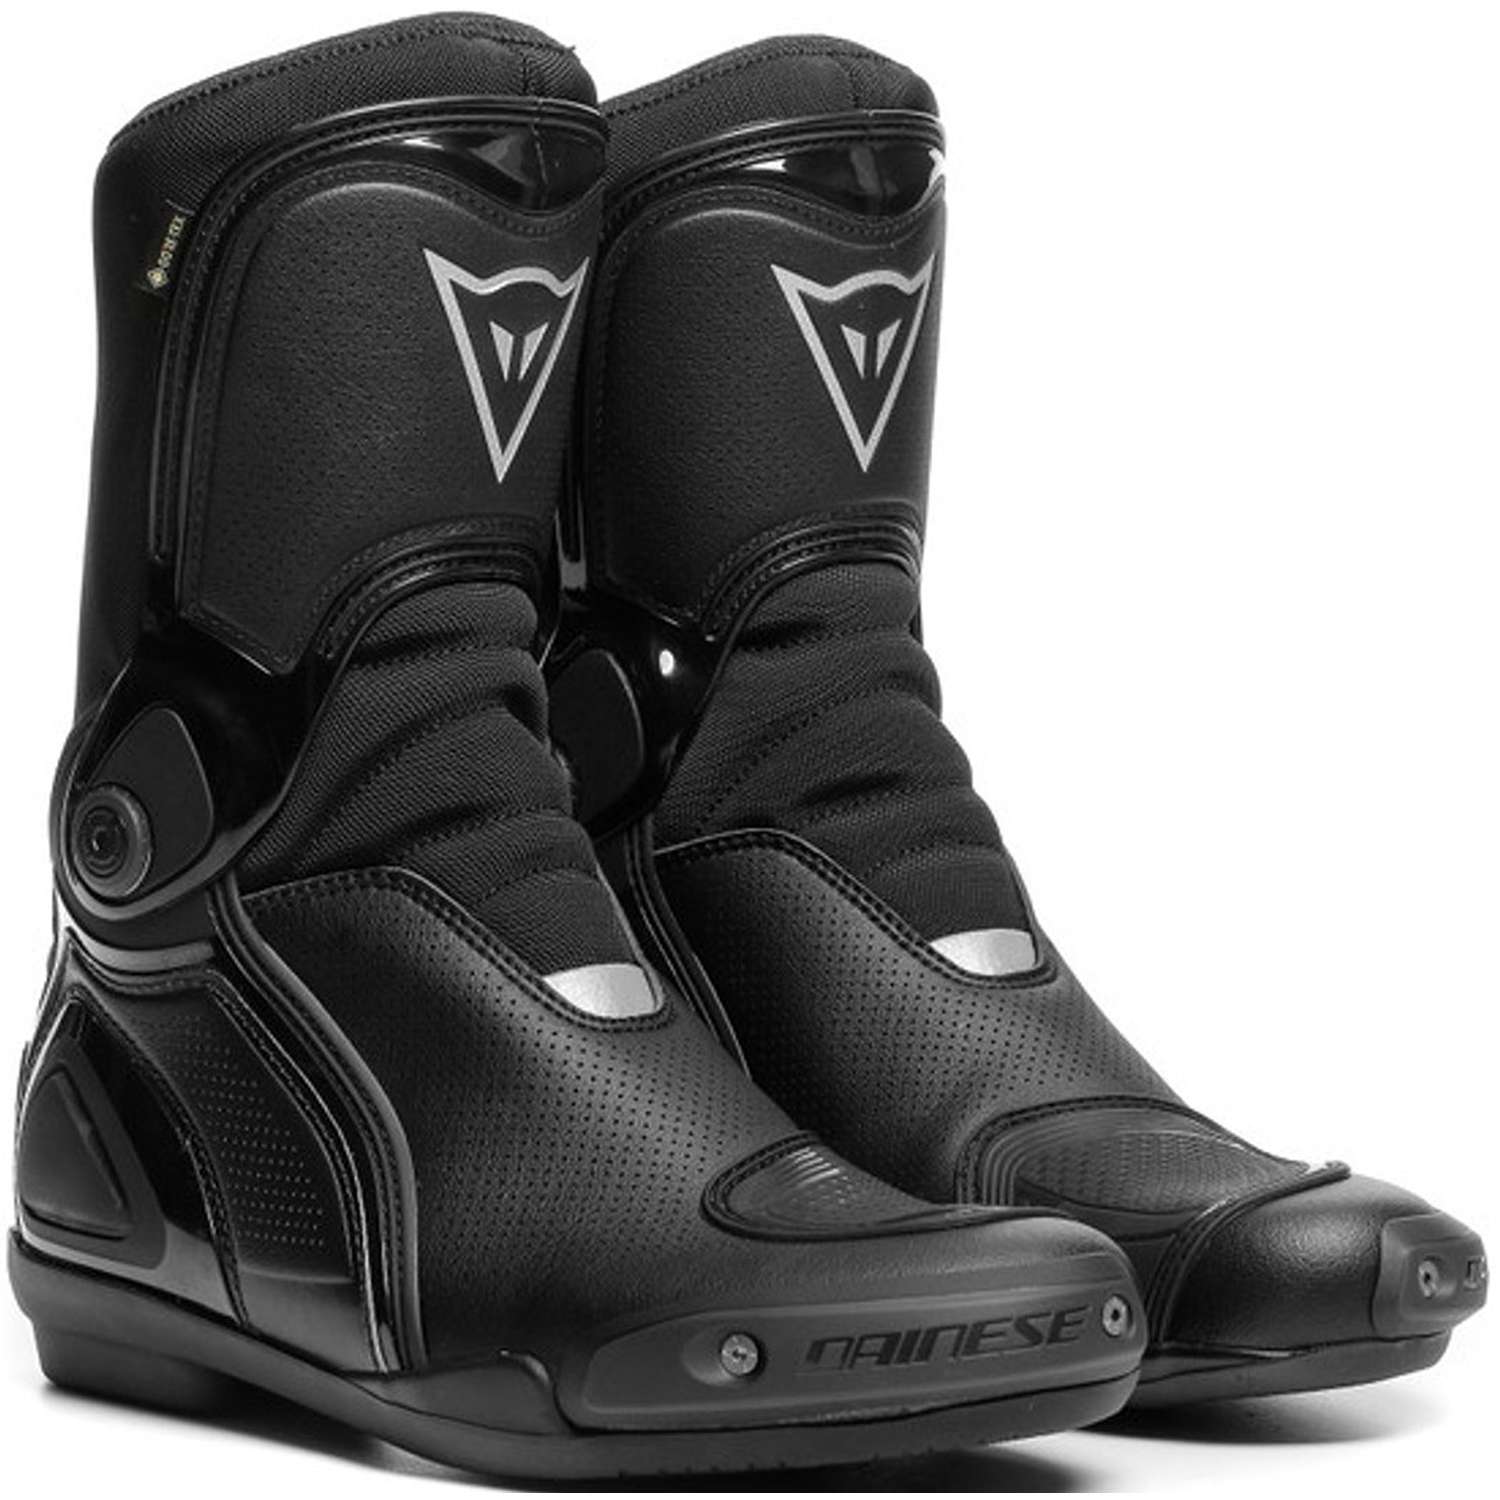 Image of Dainese Sport Master Gore-Tex Boots Black Size 45 ID 8051019215512